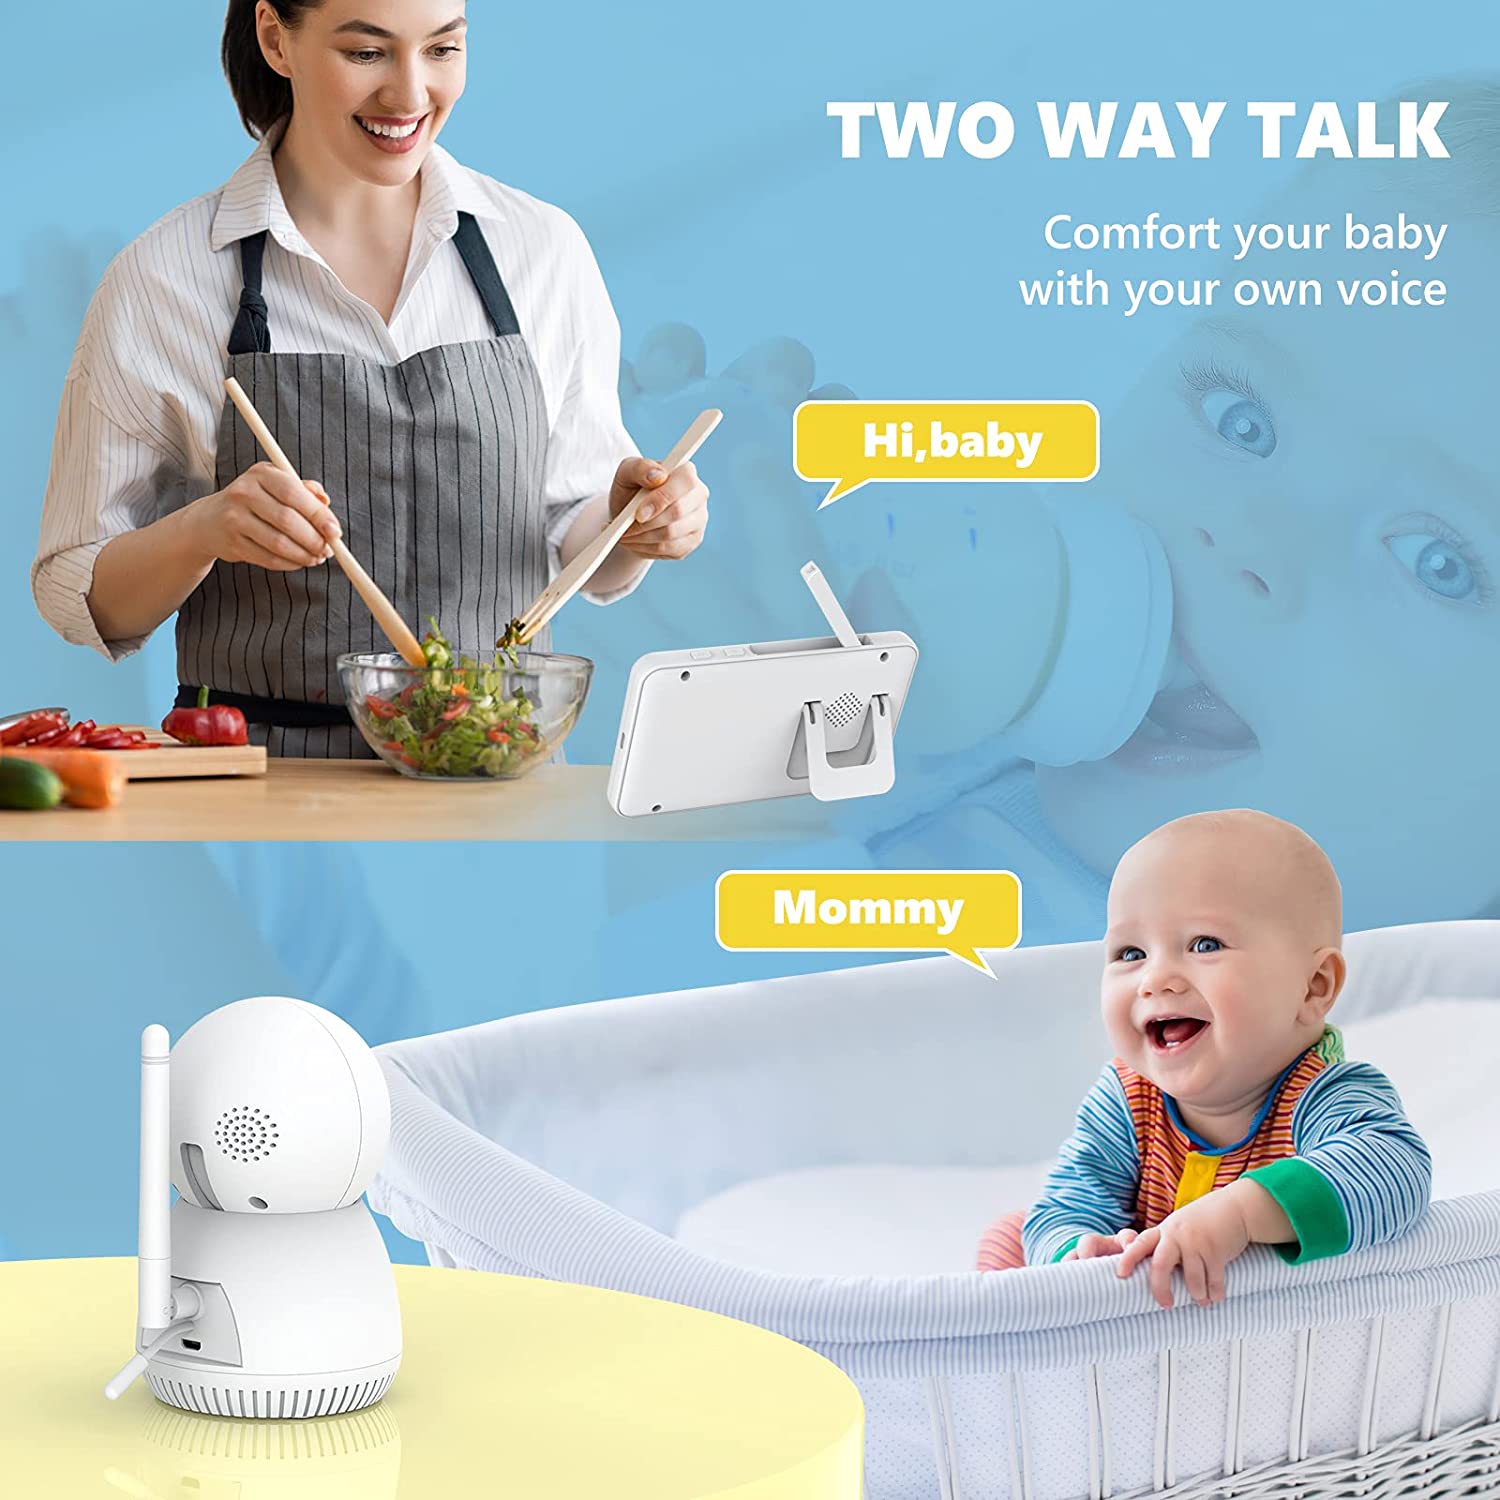 Campark BM50 Baby Camera supports two way talk 